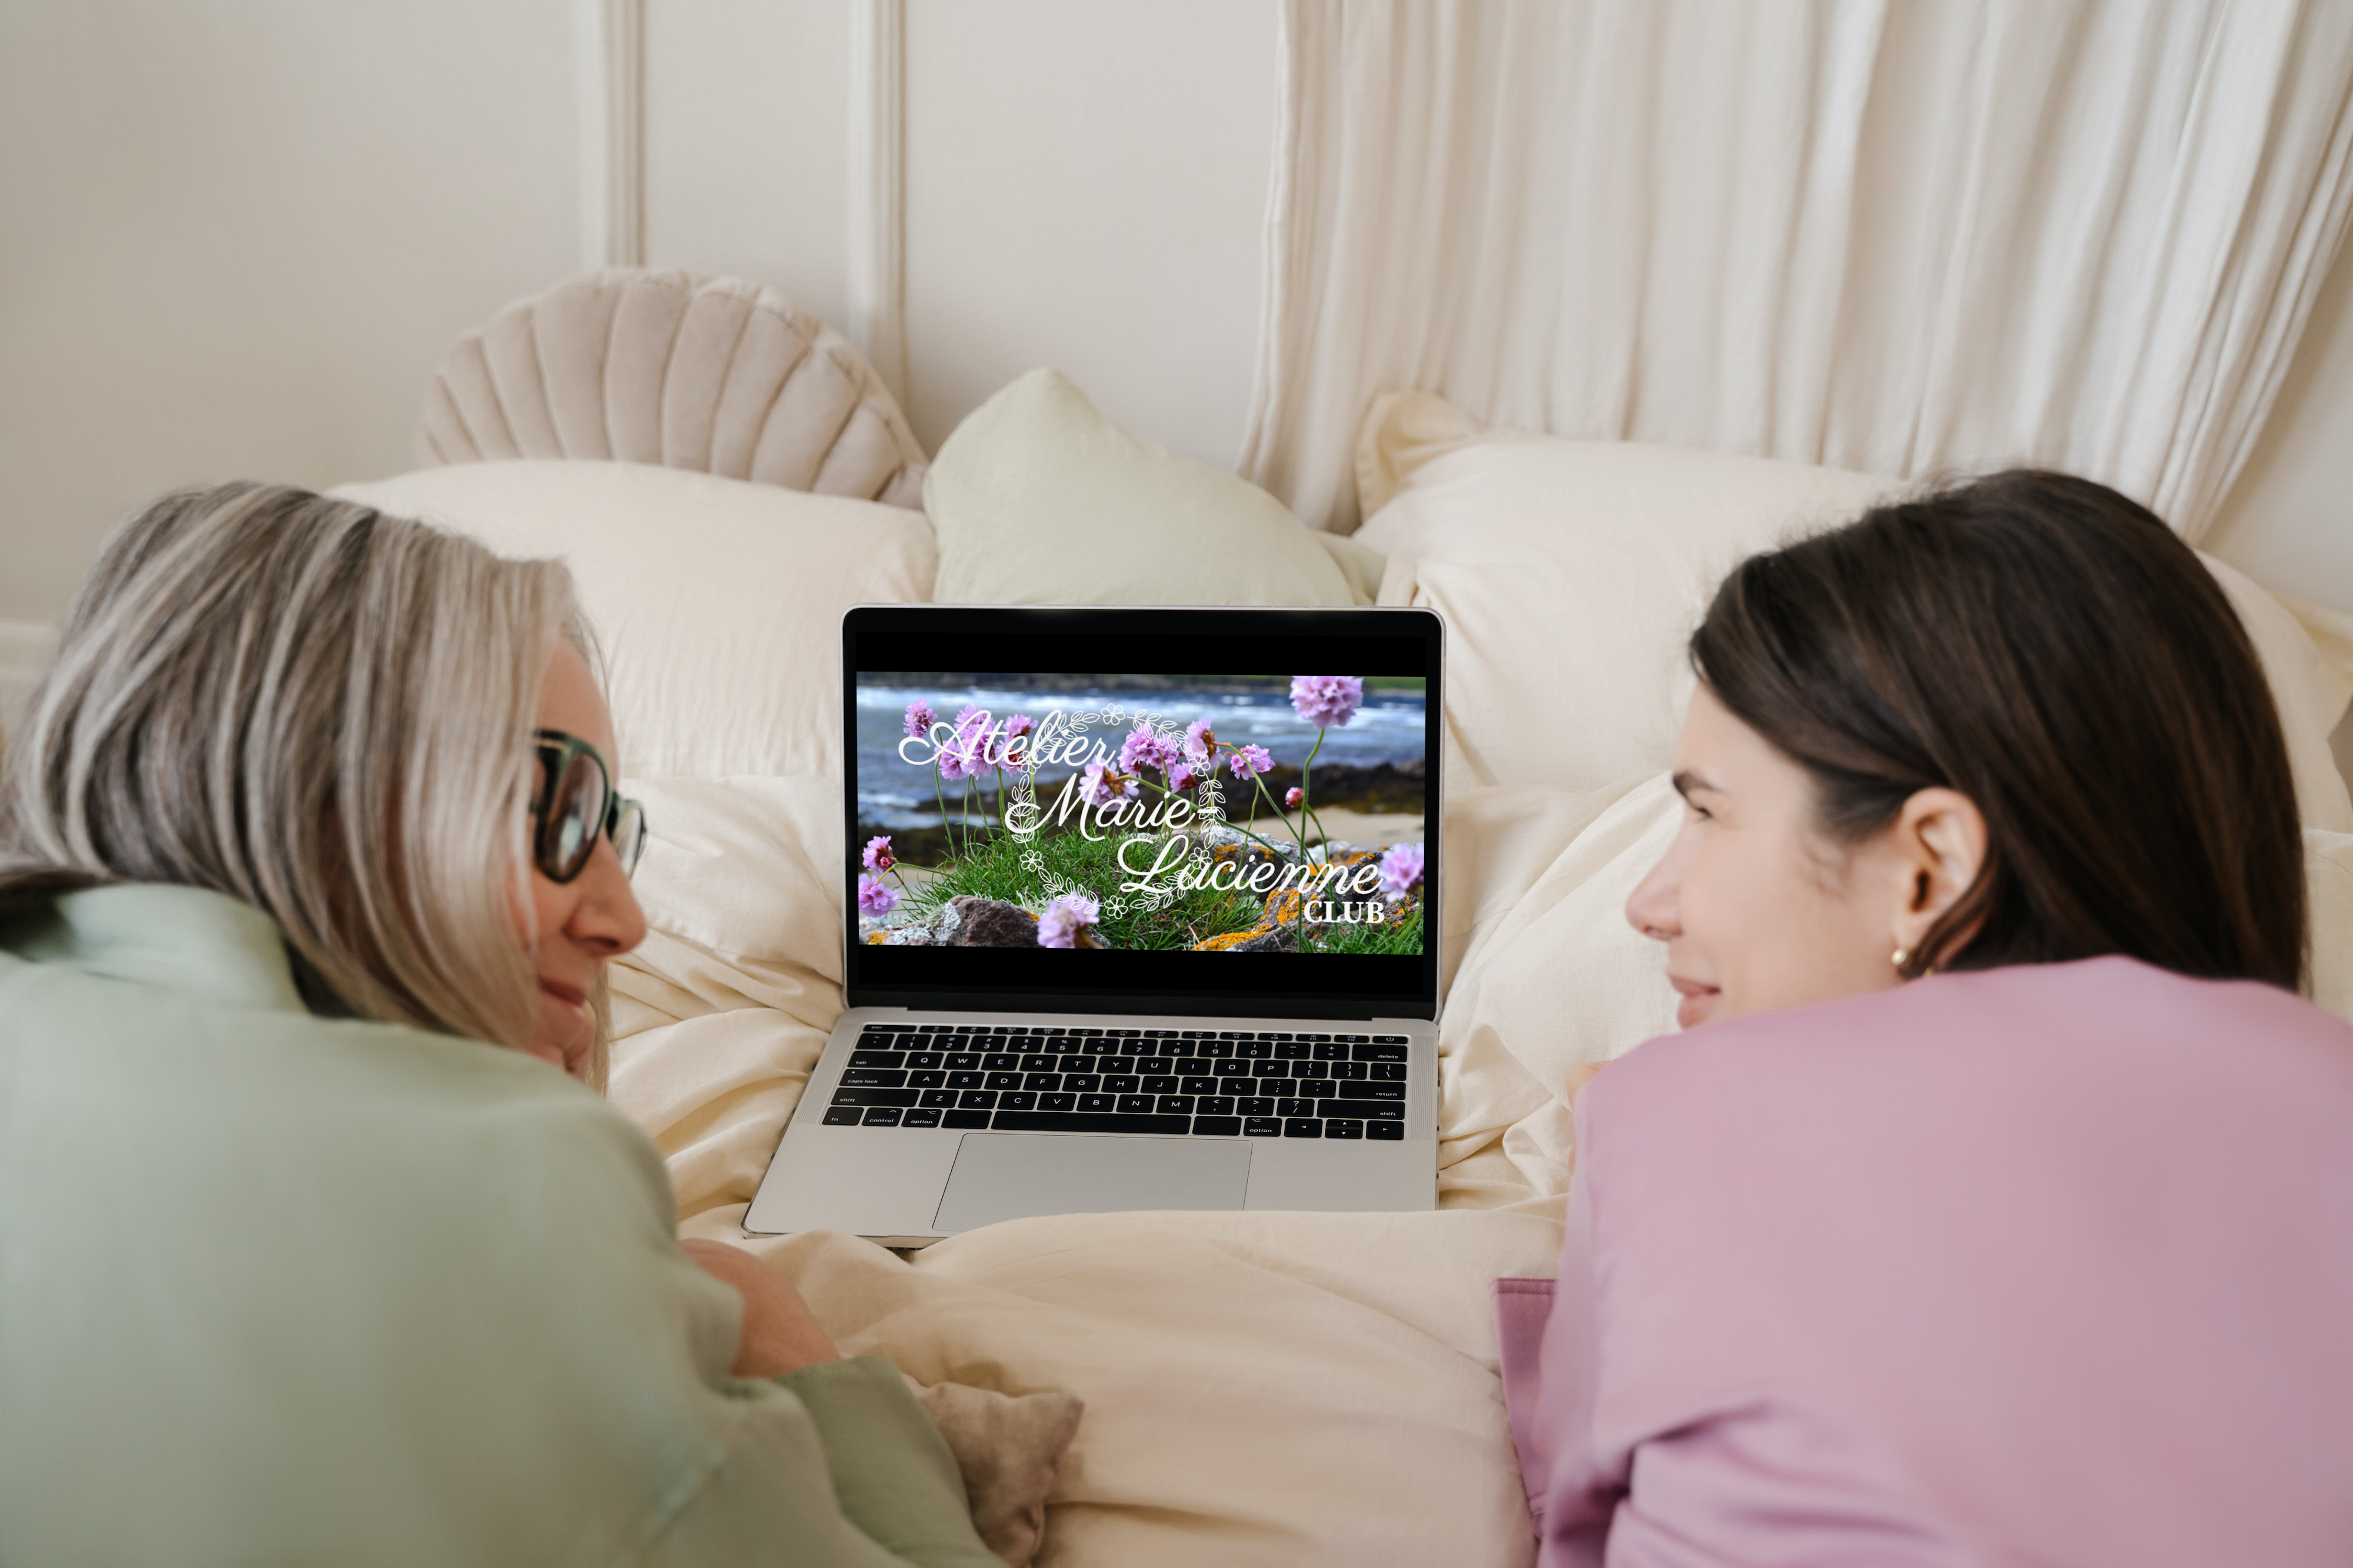 Two women chatting while watching the making of video on a laptop